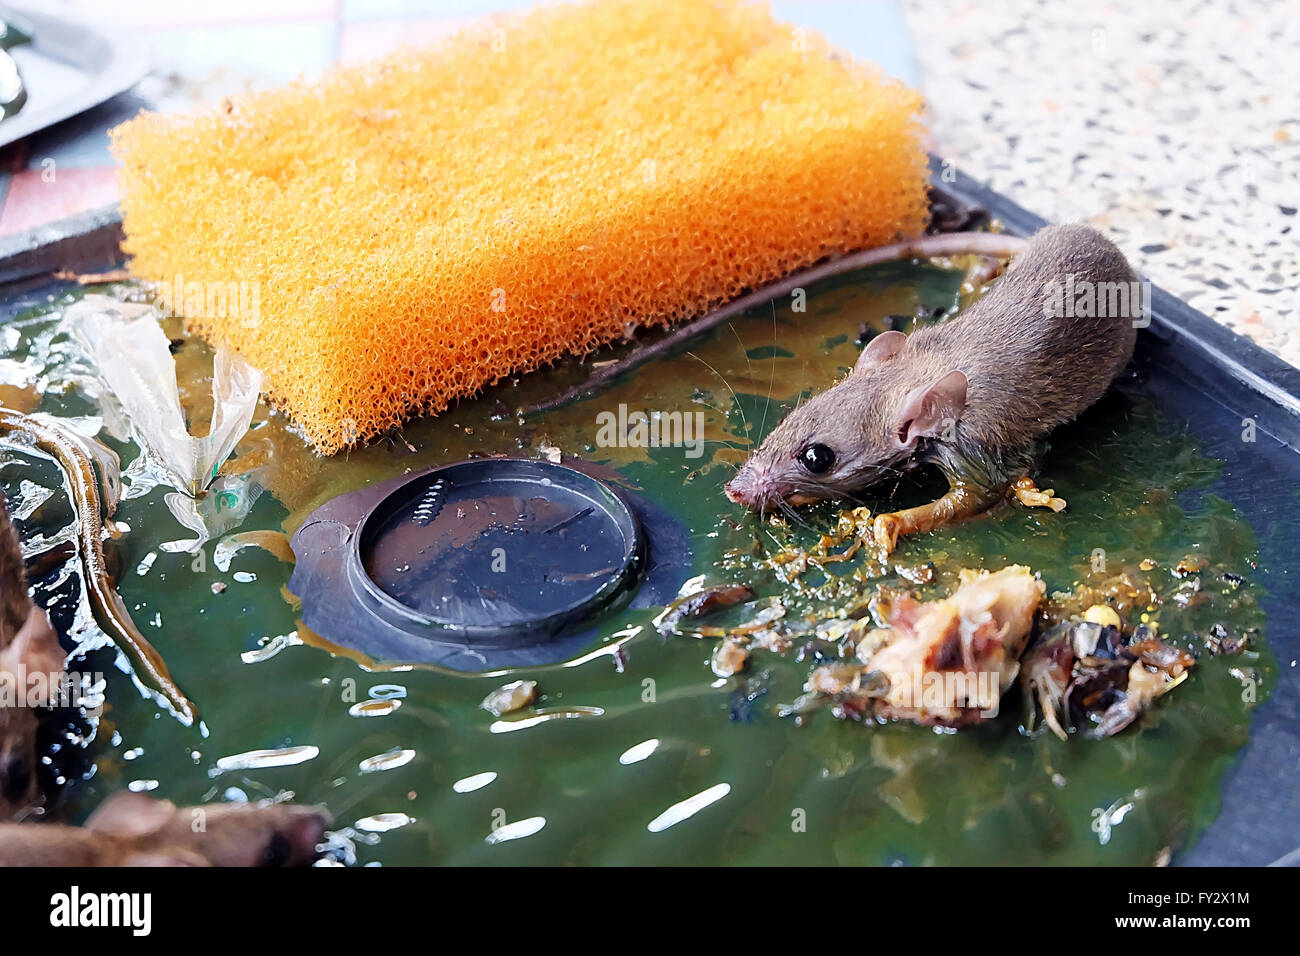 https://c8.alamy.com/comp/FY2X1M/dead-rats-on-rat-glue-traps-rats-are-a-nuisance-in-the-house-FY2X1M.jpg